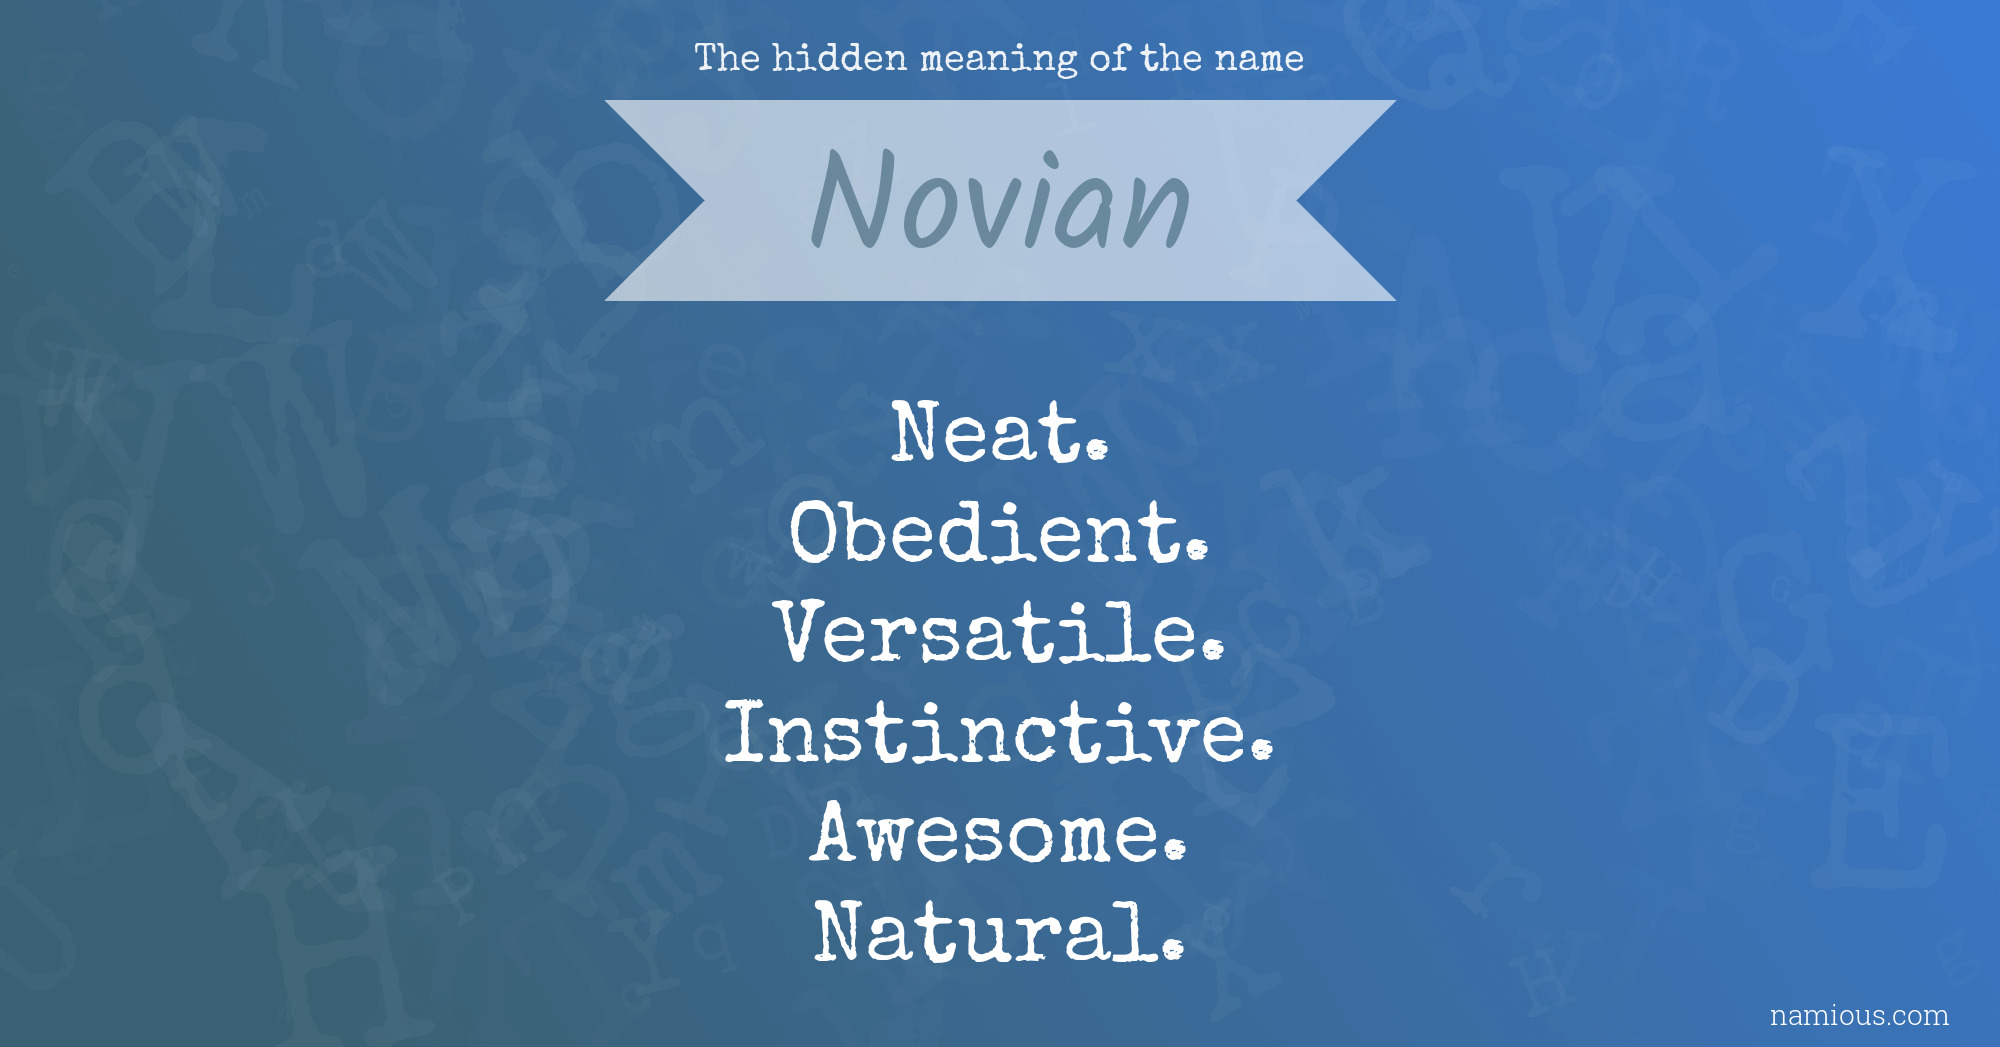 The hidden meaning of the name Novian